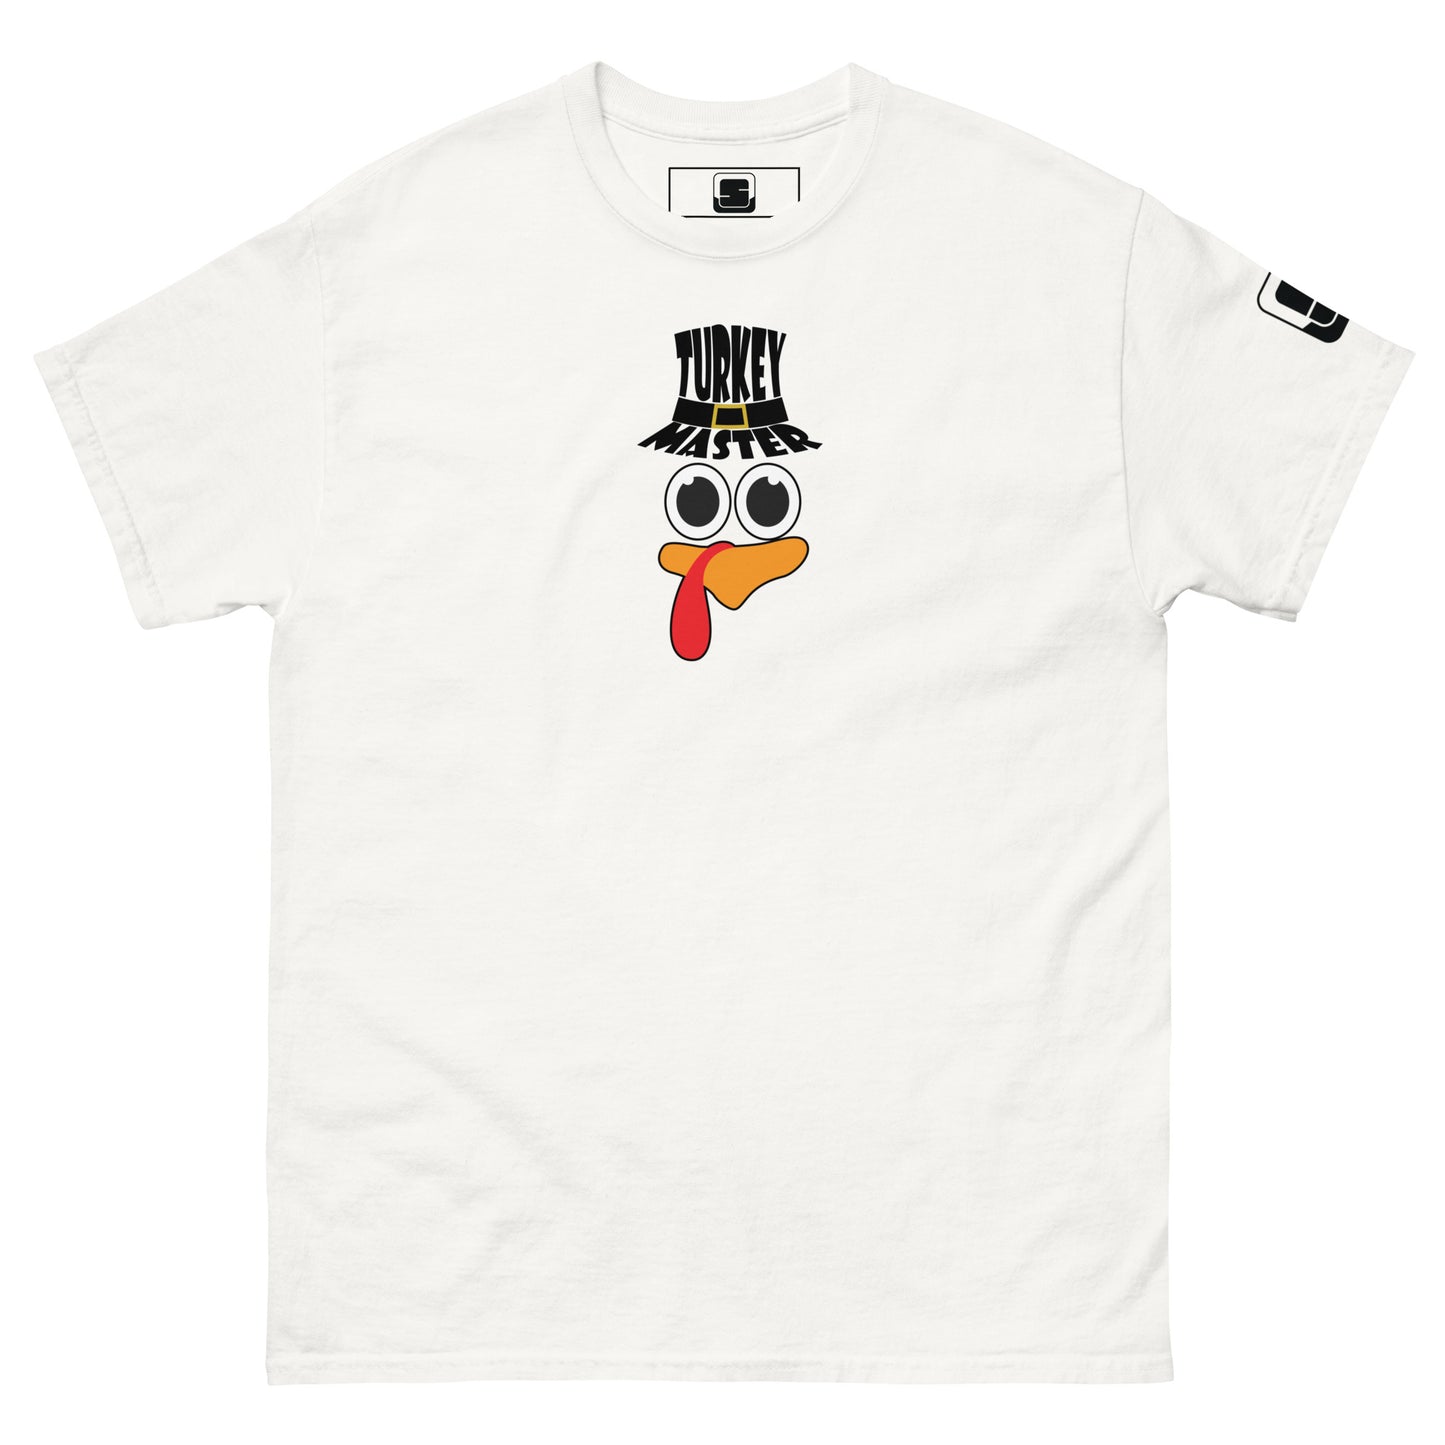 A white t-shirt featuring a playful graphic design of a turkey face with eyes, an orange beak, and a red snood. Above the face, the text reads "TURKEY MASTER" in bold, stylized letters. The text is in the shape of a pilgrims hat. On the left sleeve, there's a rectangular logo patch, adding a unique touch. The shirt is laid out flat, showcasing the entire design clearly.